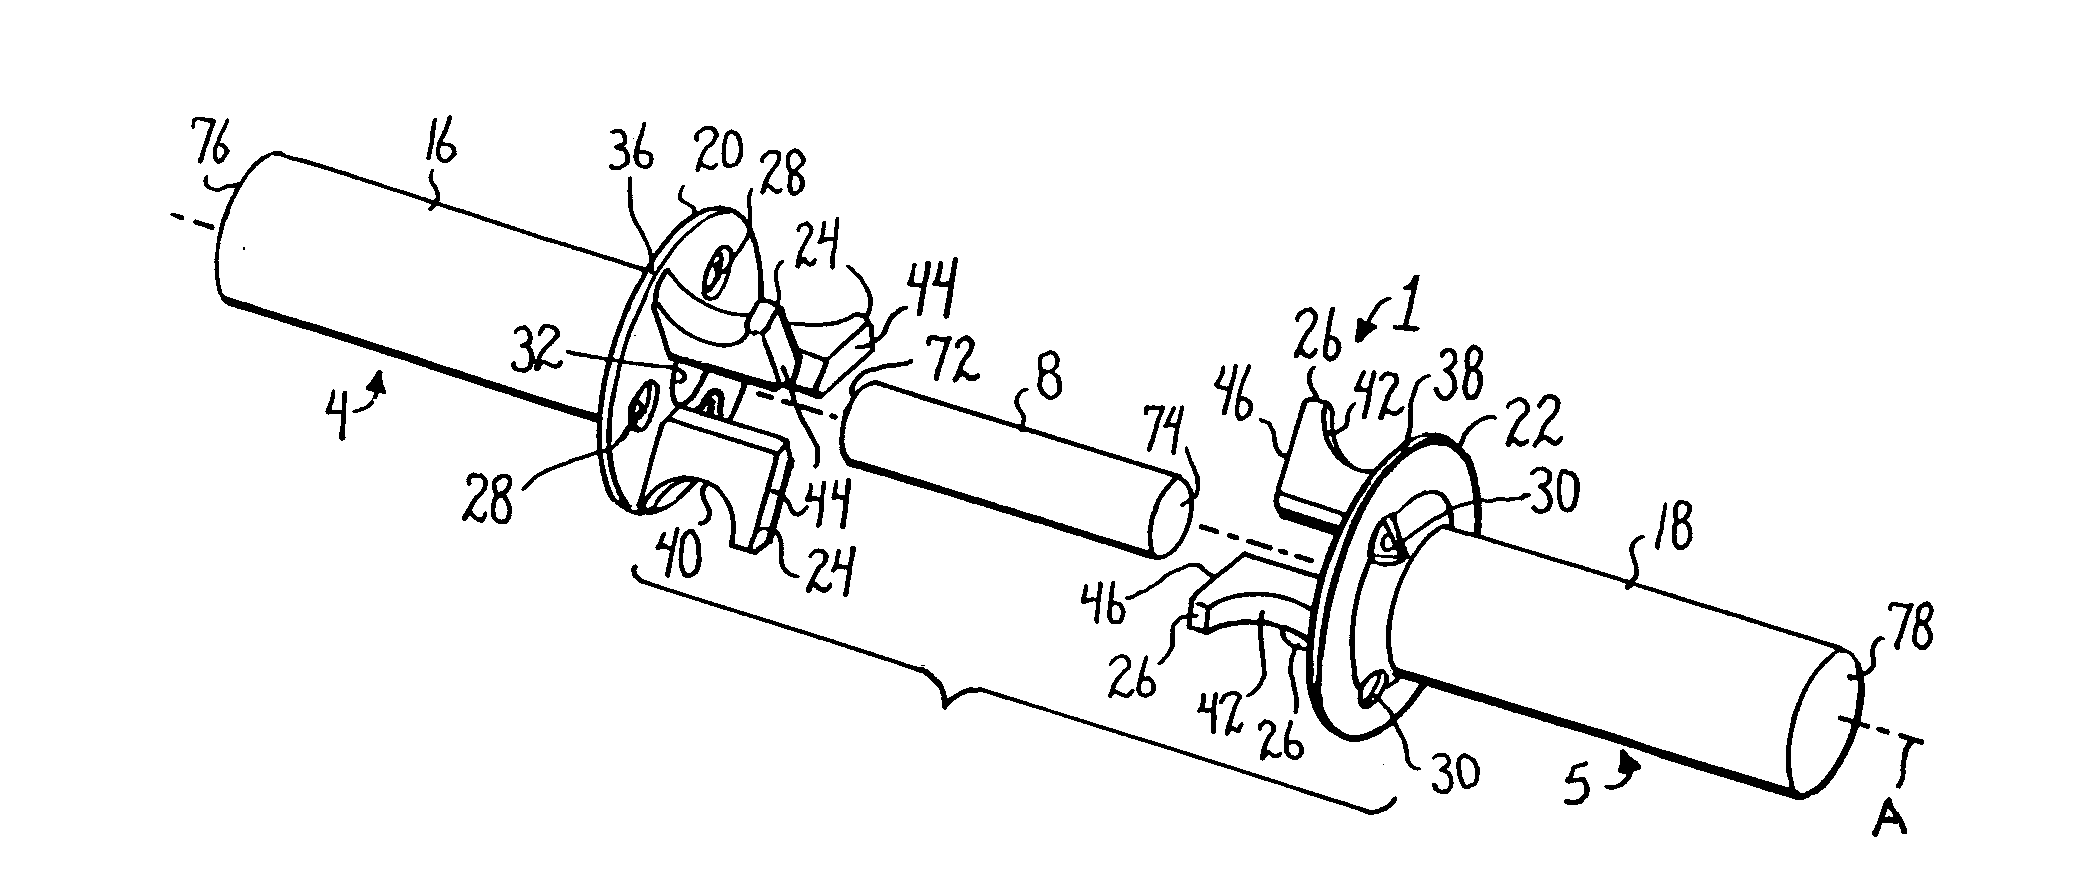 Dynamic stabilization member with fin supported segment